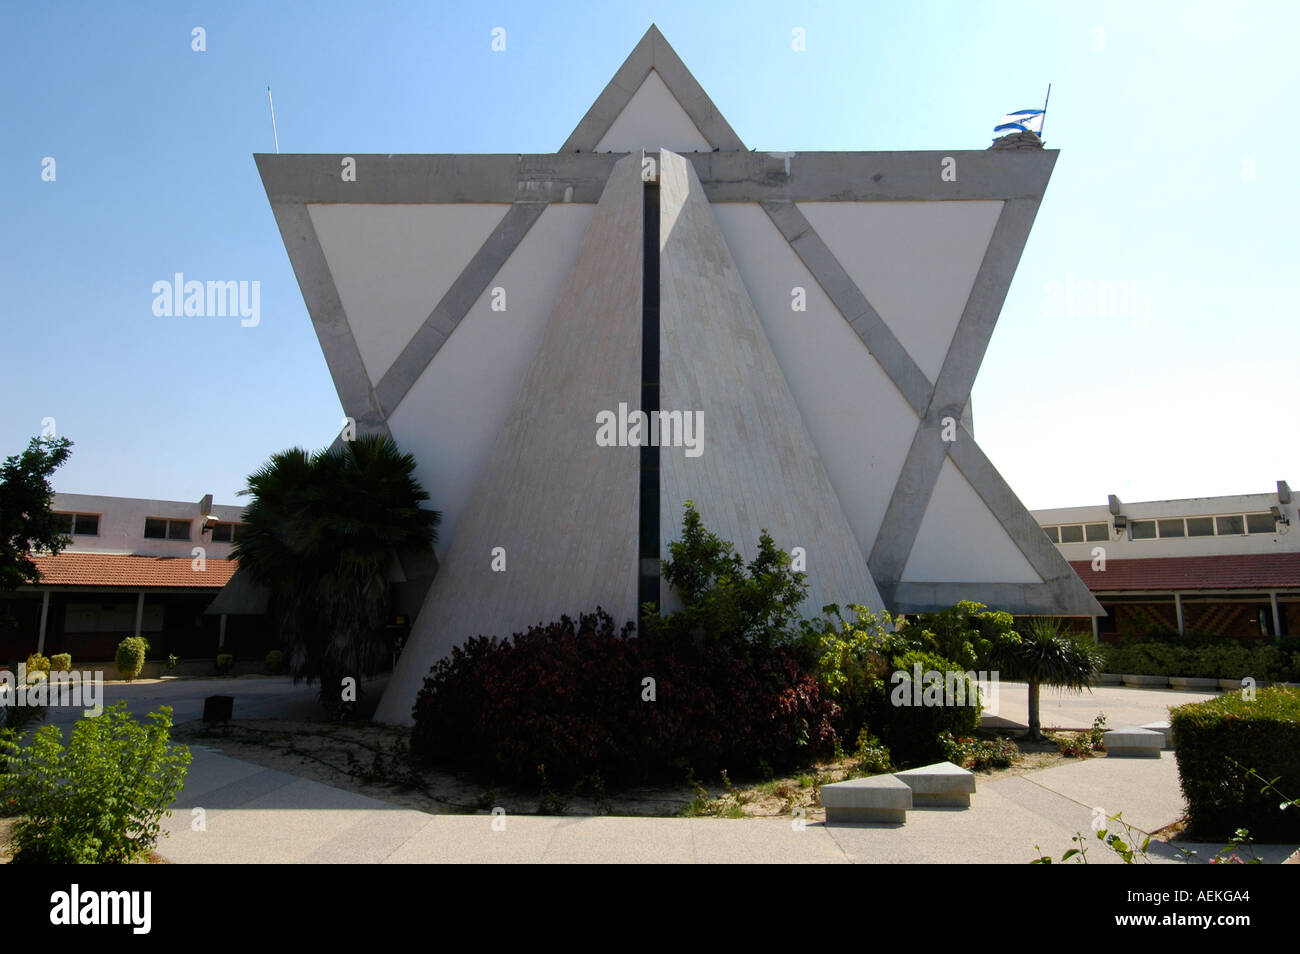 View of the Yamit Yeshiva synagogue built in the shape of a Star of David in Neve Dekalim Jewish settlement in Gaza strip Stock Photo